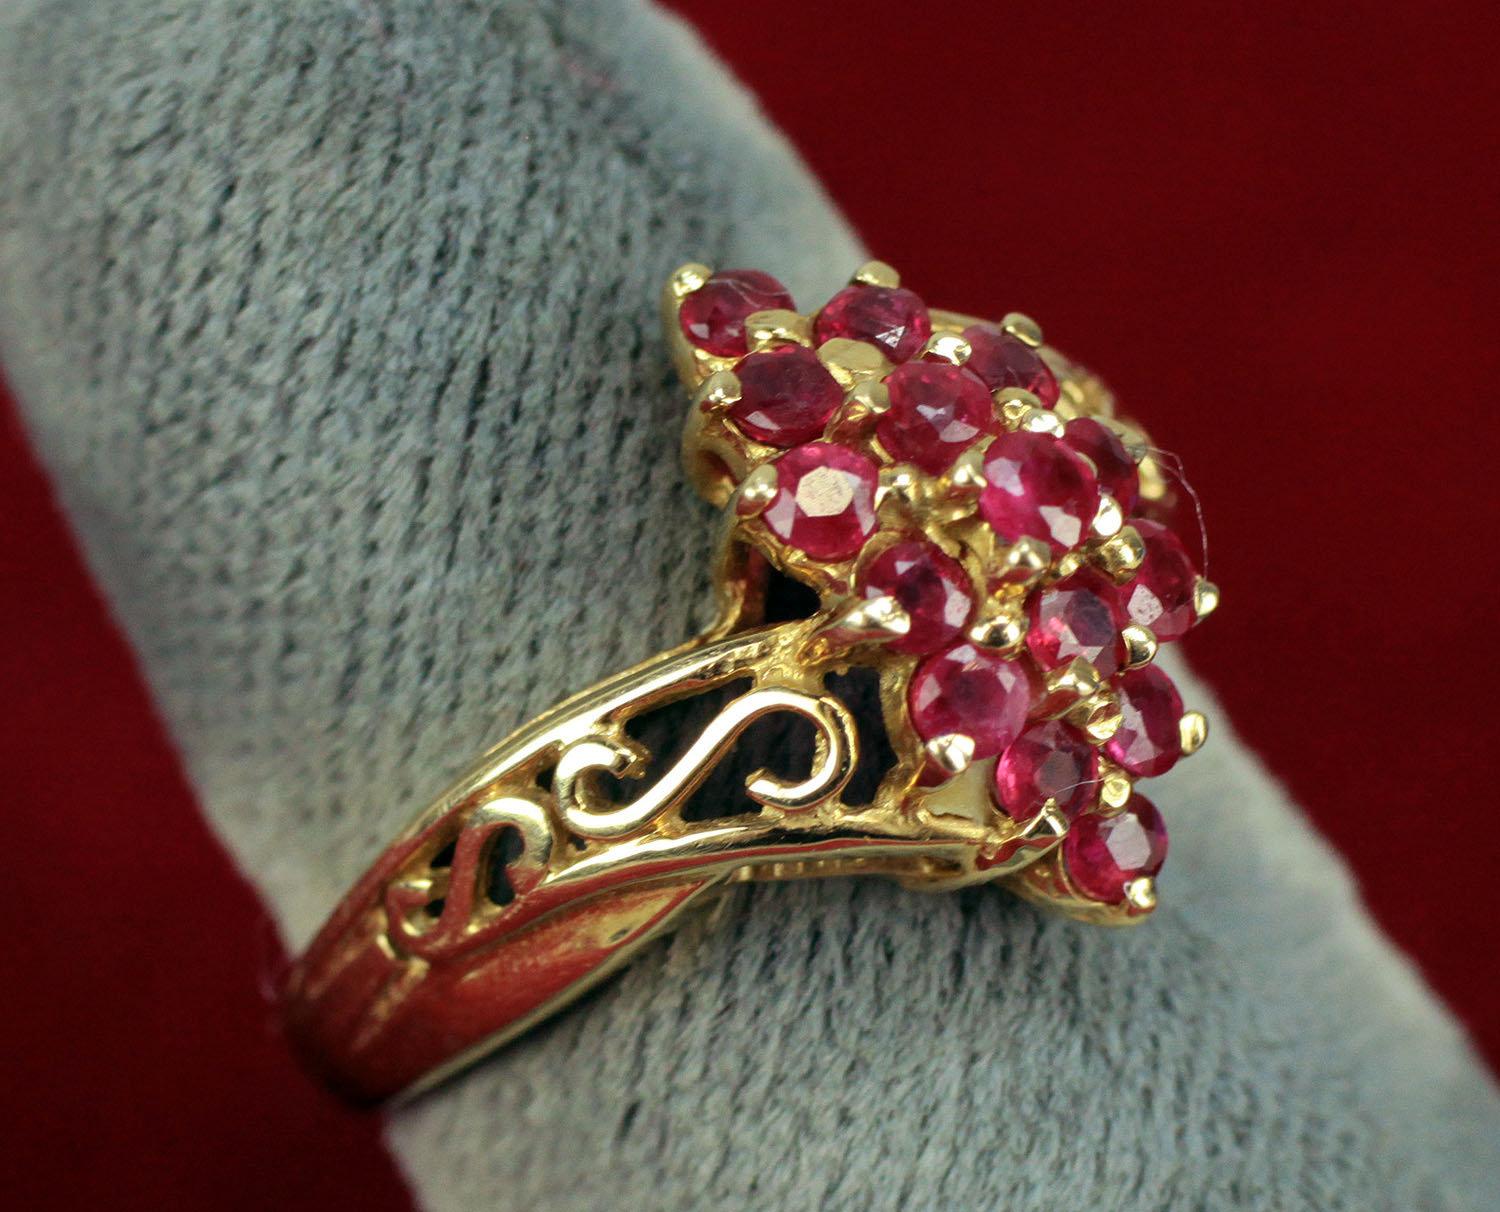 10K Gold Ladies Ring w/ Ruby Colored Stones, Sz 5